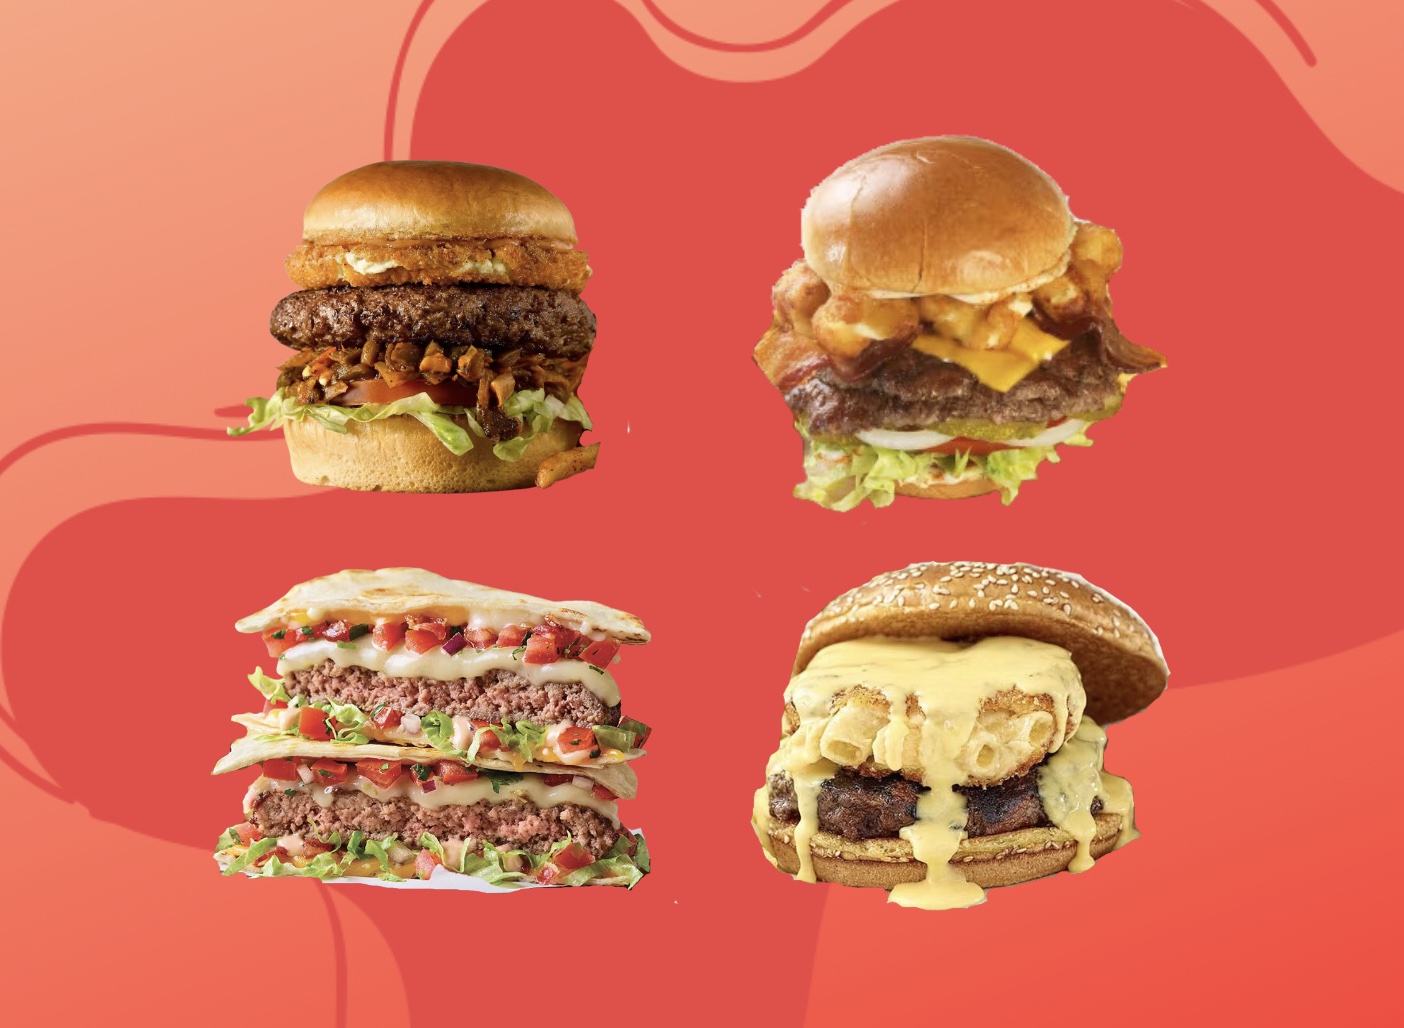 11 Restaurant Chains With the Most Over-the-Top Burgers